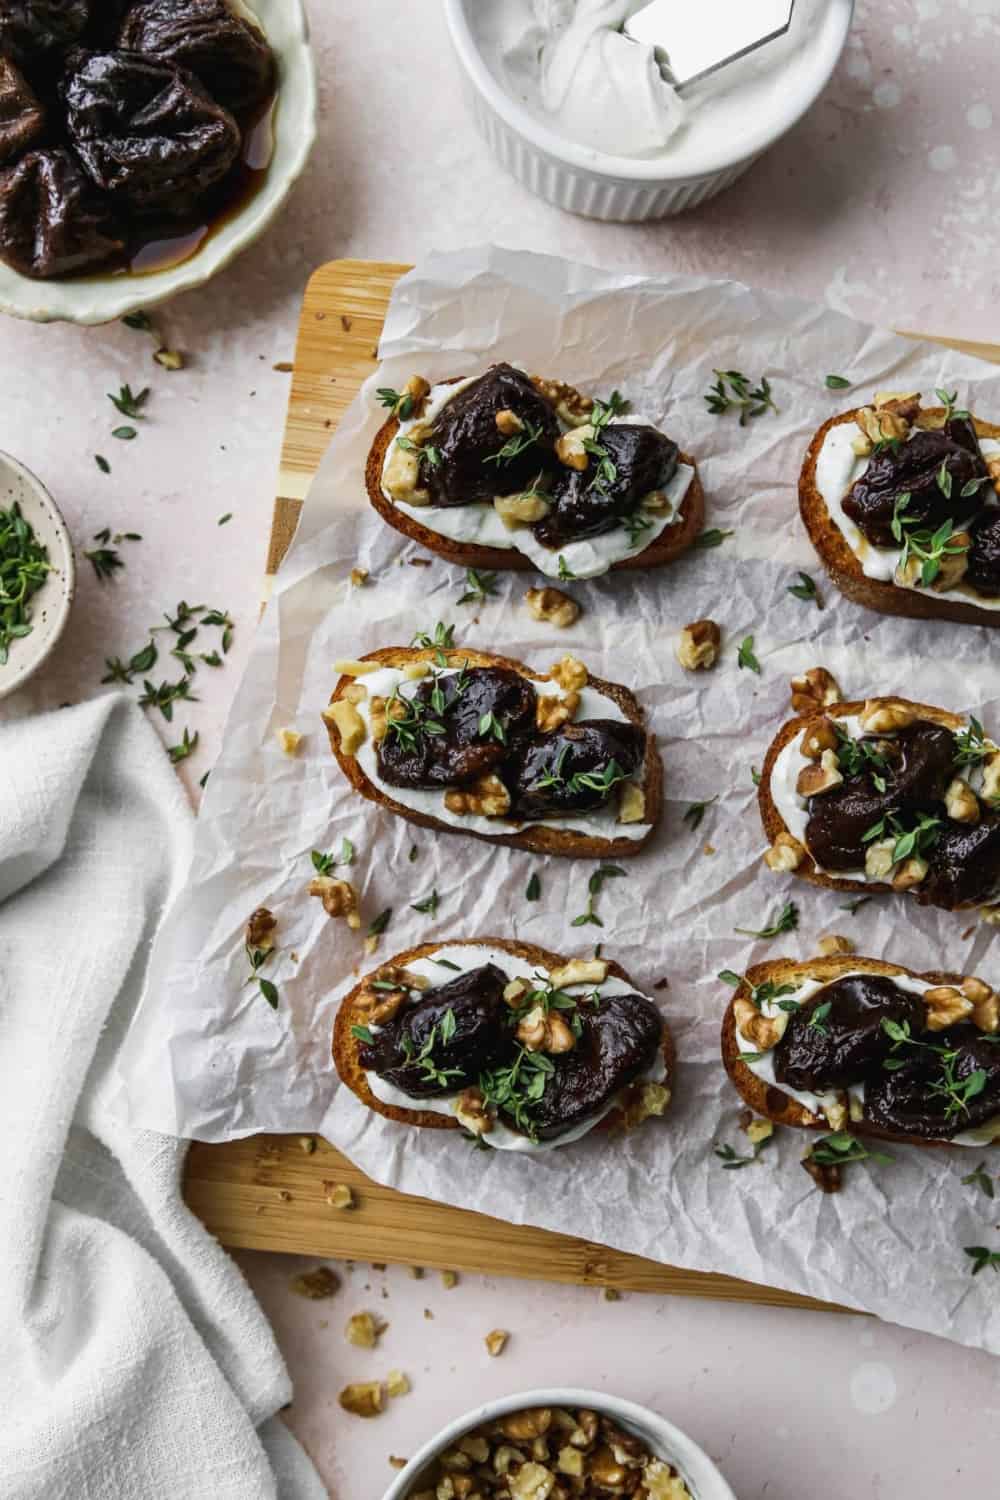 whipped goat cheese and stewed prunes on crostini bread